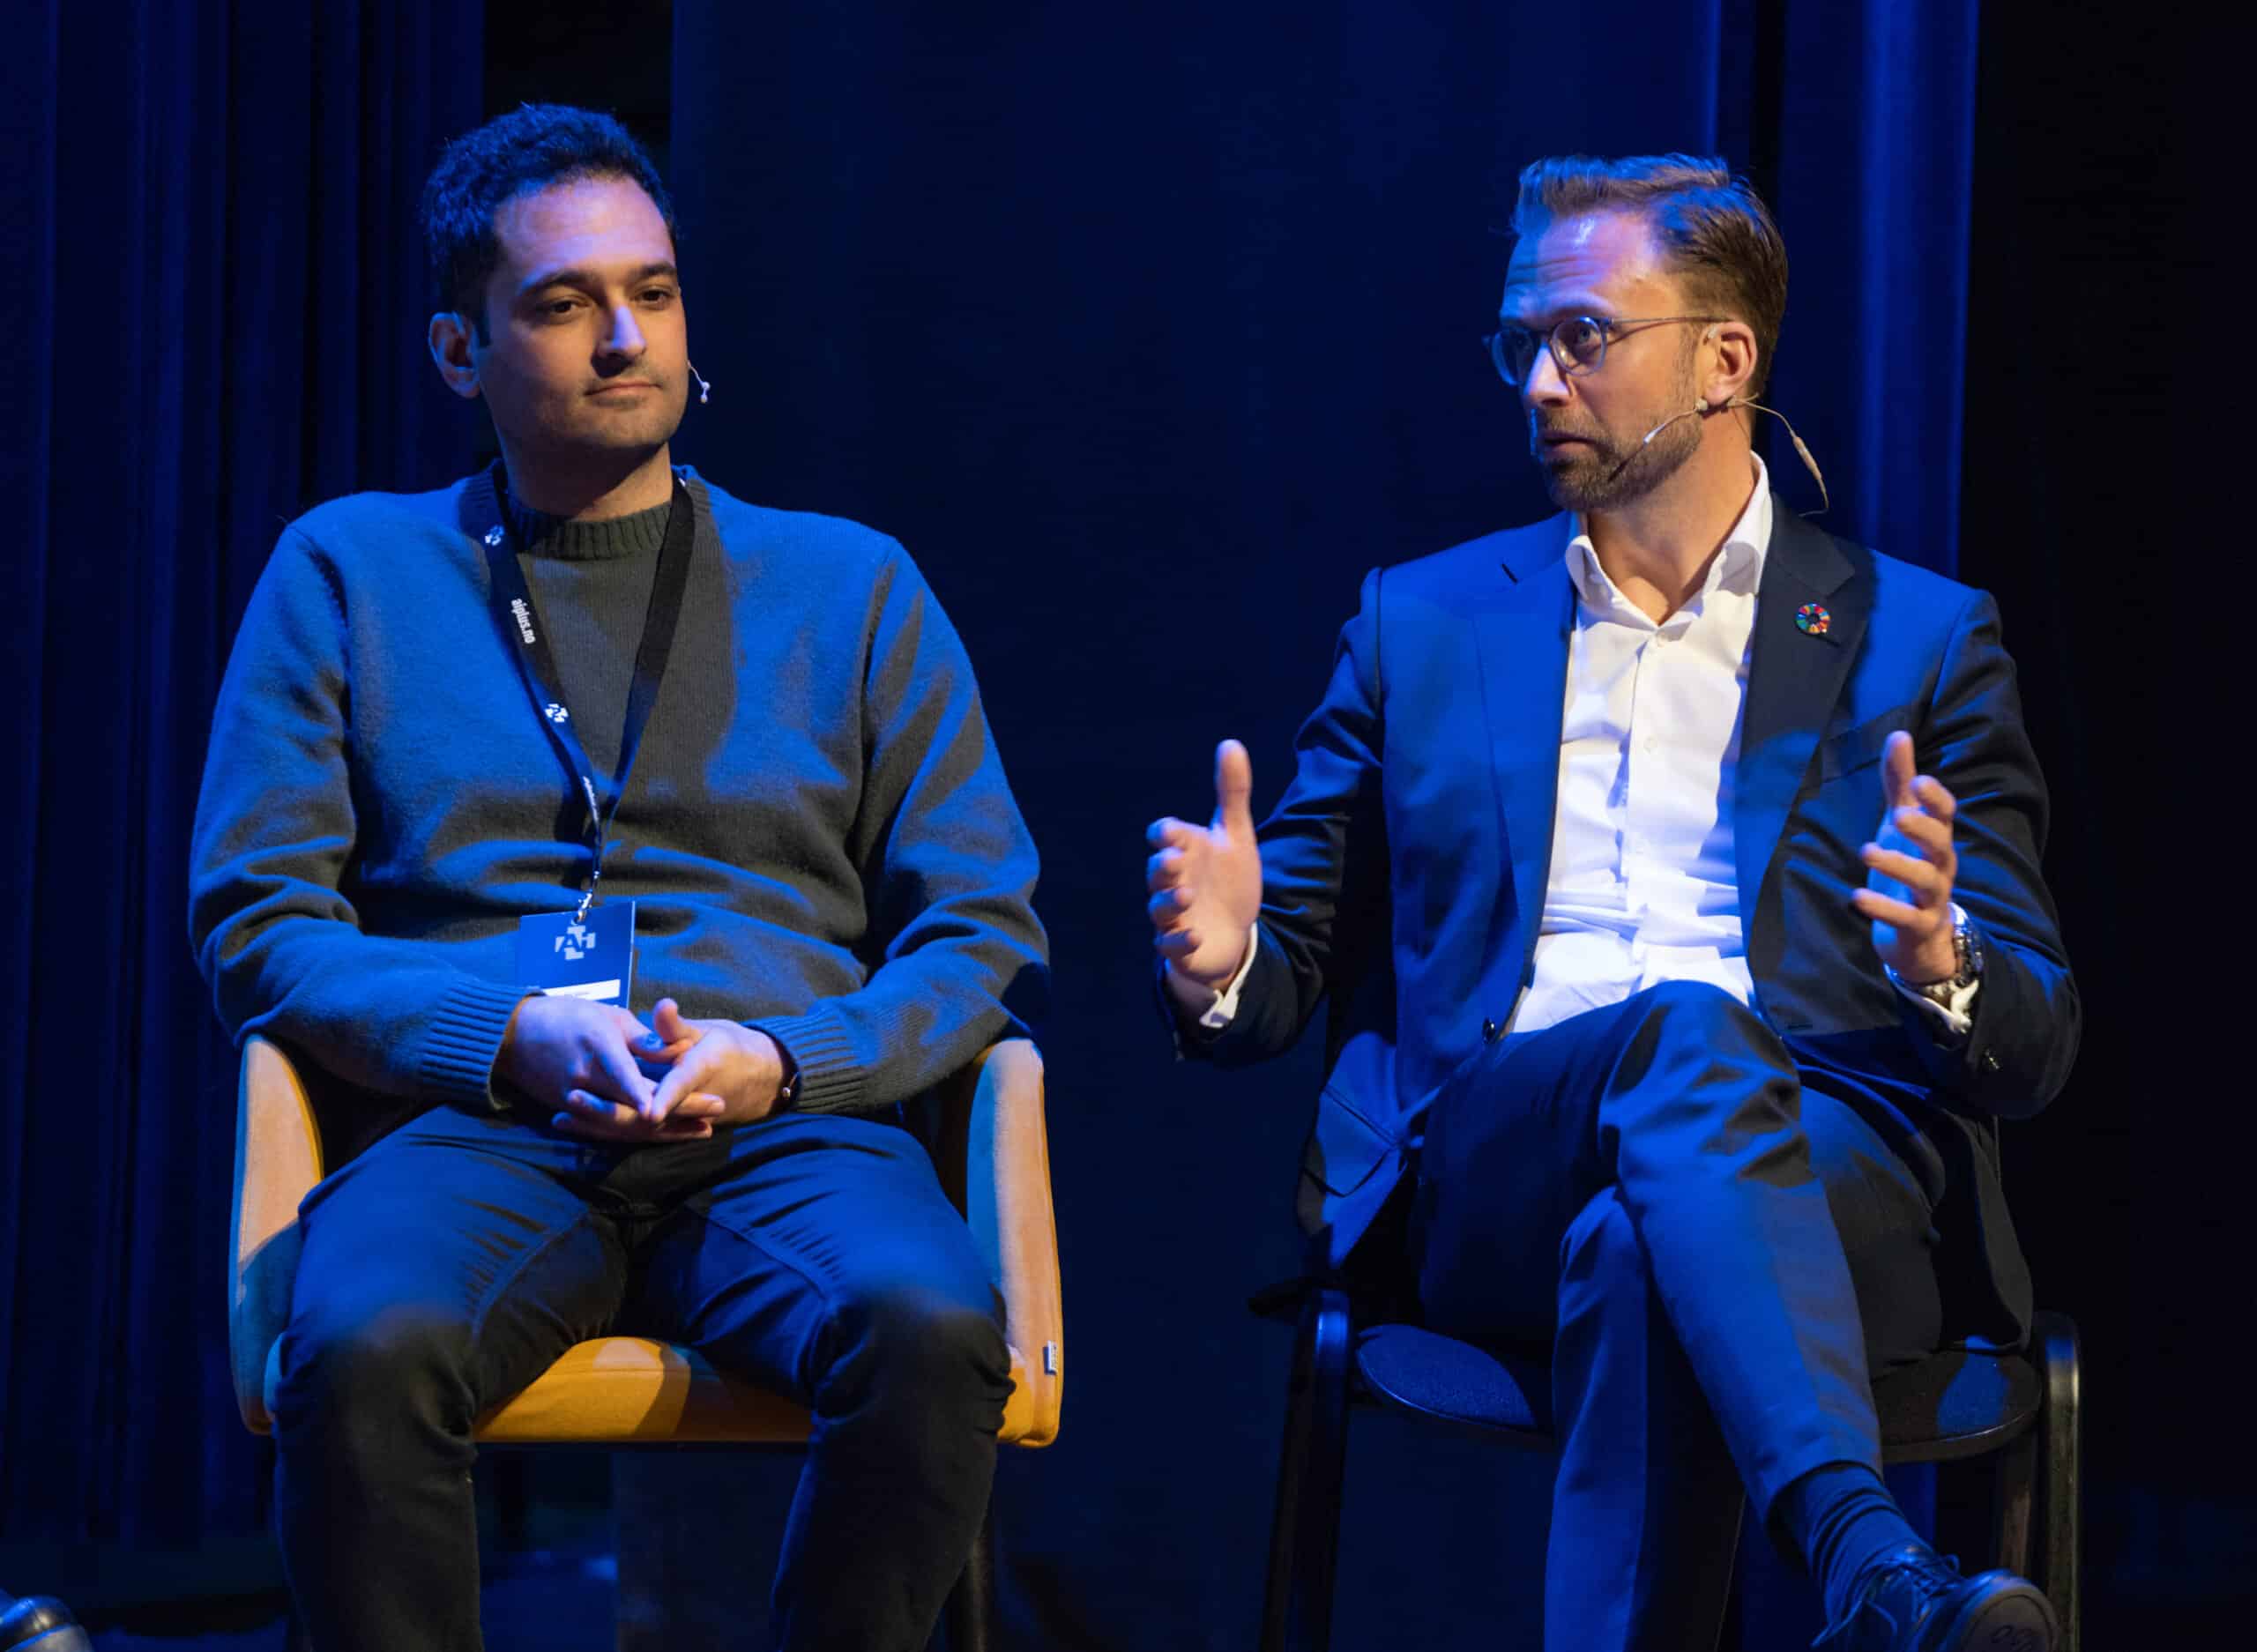 Sina Nek Akhtar from Google (left) and Nikolai Astrup from Conservative Party. PHOTO: Stein Johnsen, Contentvideo.no